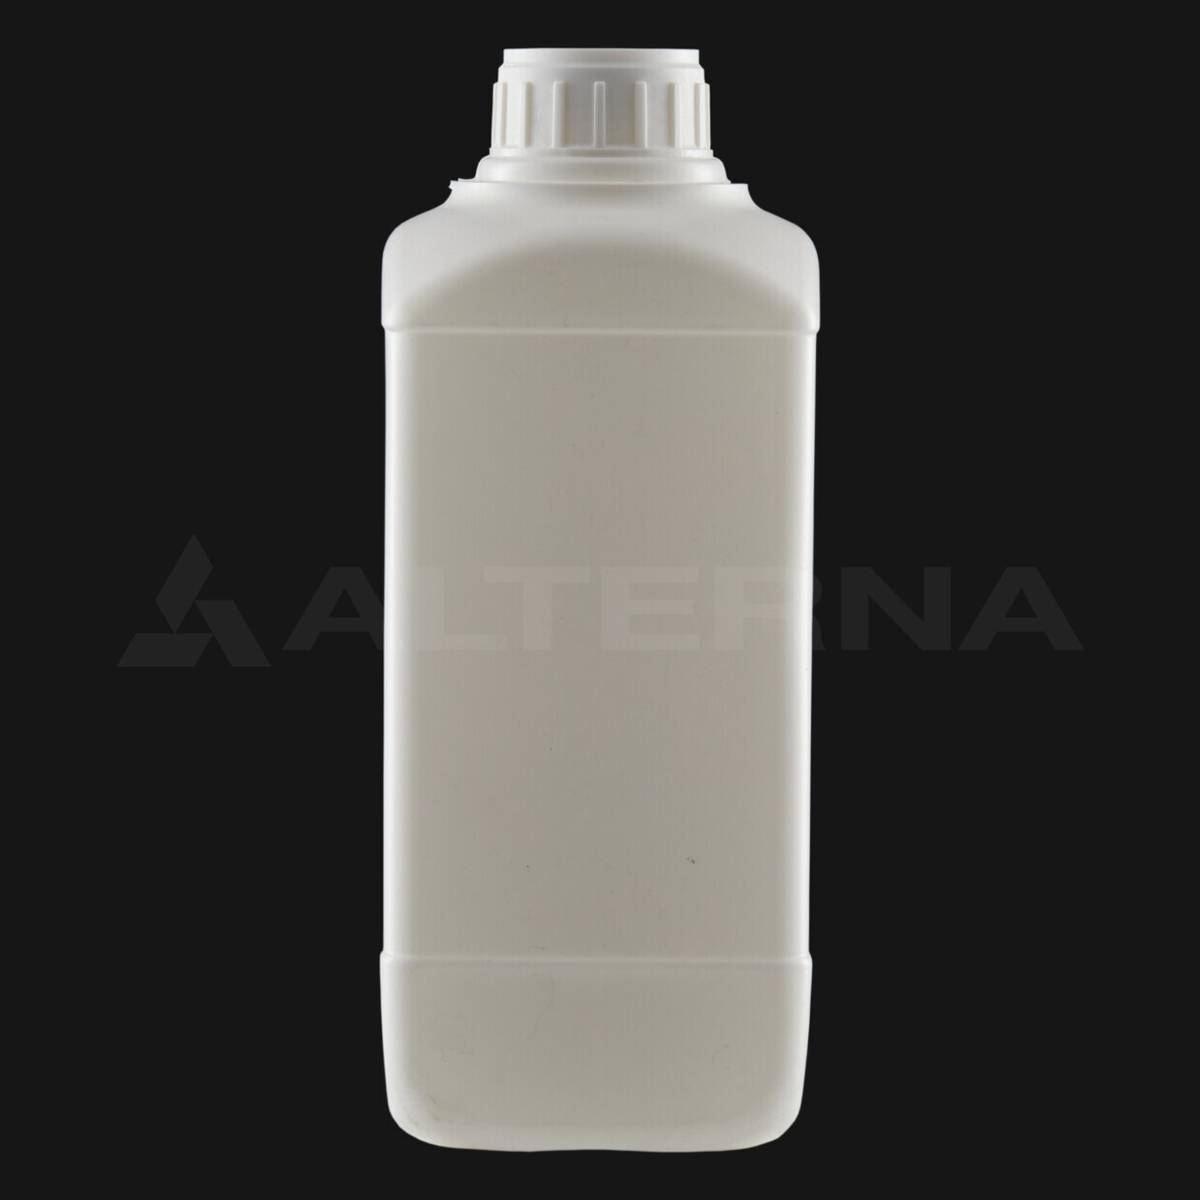 https://d28ehrx95xozcp.cloudfront.net/filters:quality(70)/fit-in/1200x1200/alterna/alterna-1000-ml-HDPE-Square-Bottle-with-38-mm-Alu-Foil-Seal-Cap-B1008D-1-rpJa.jpg